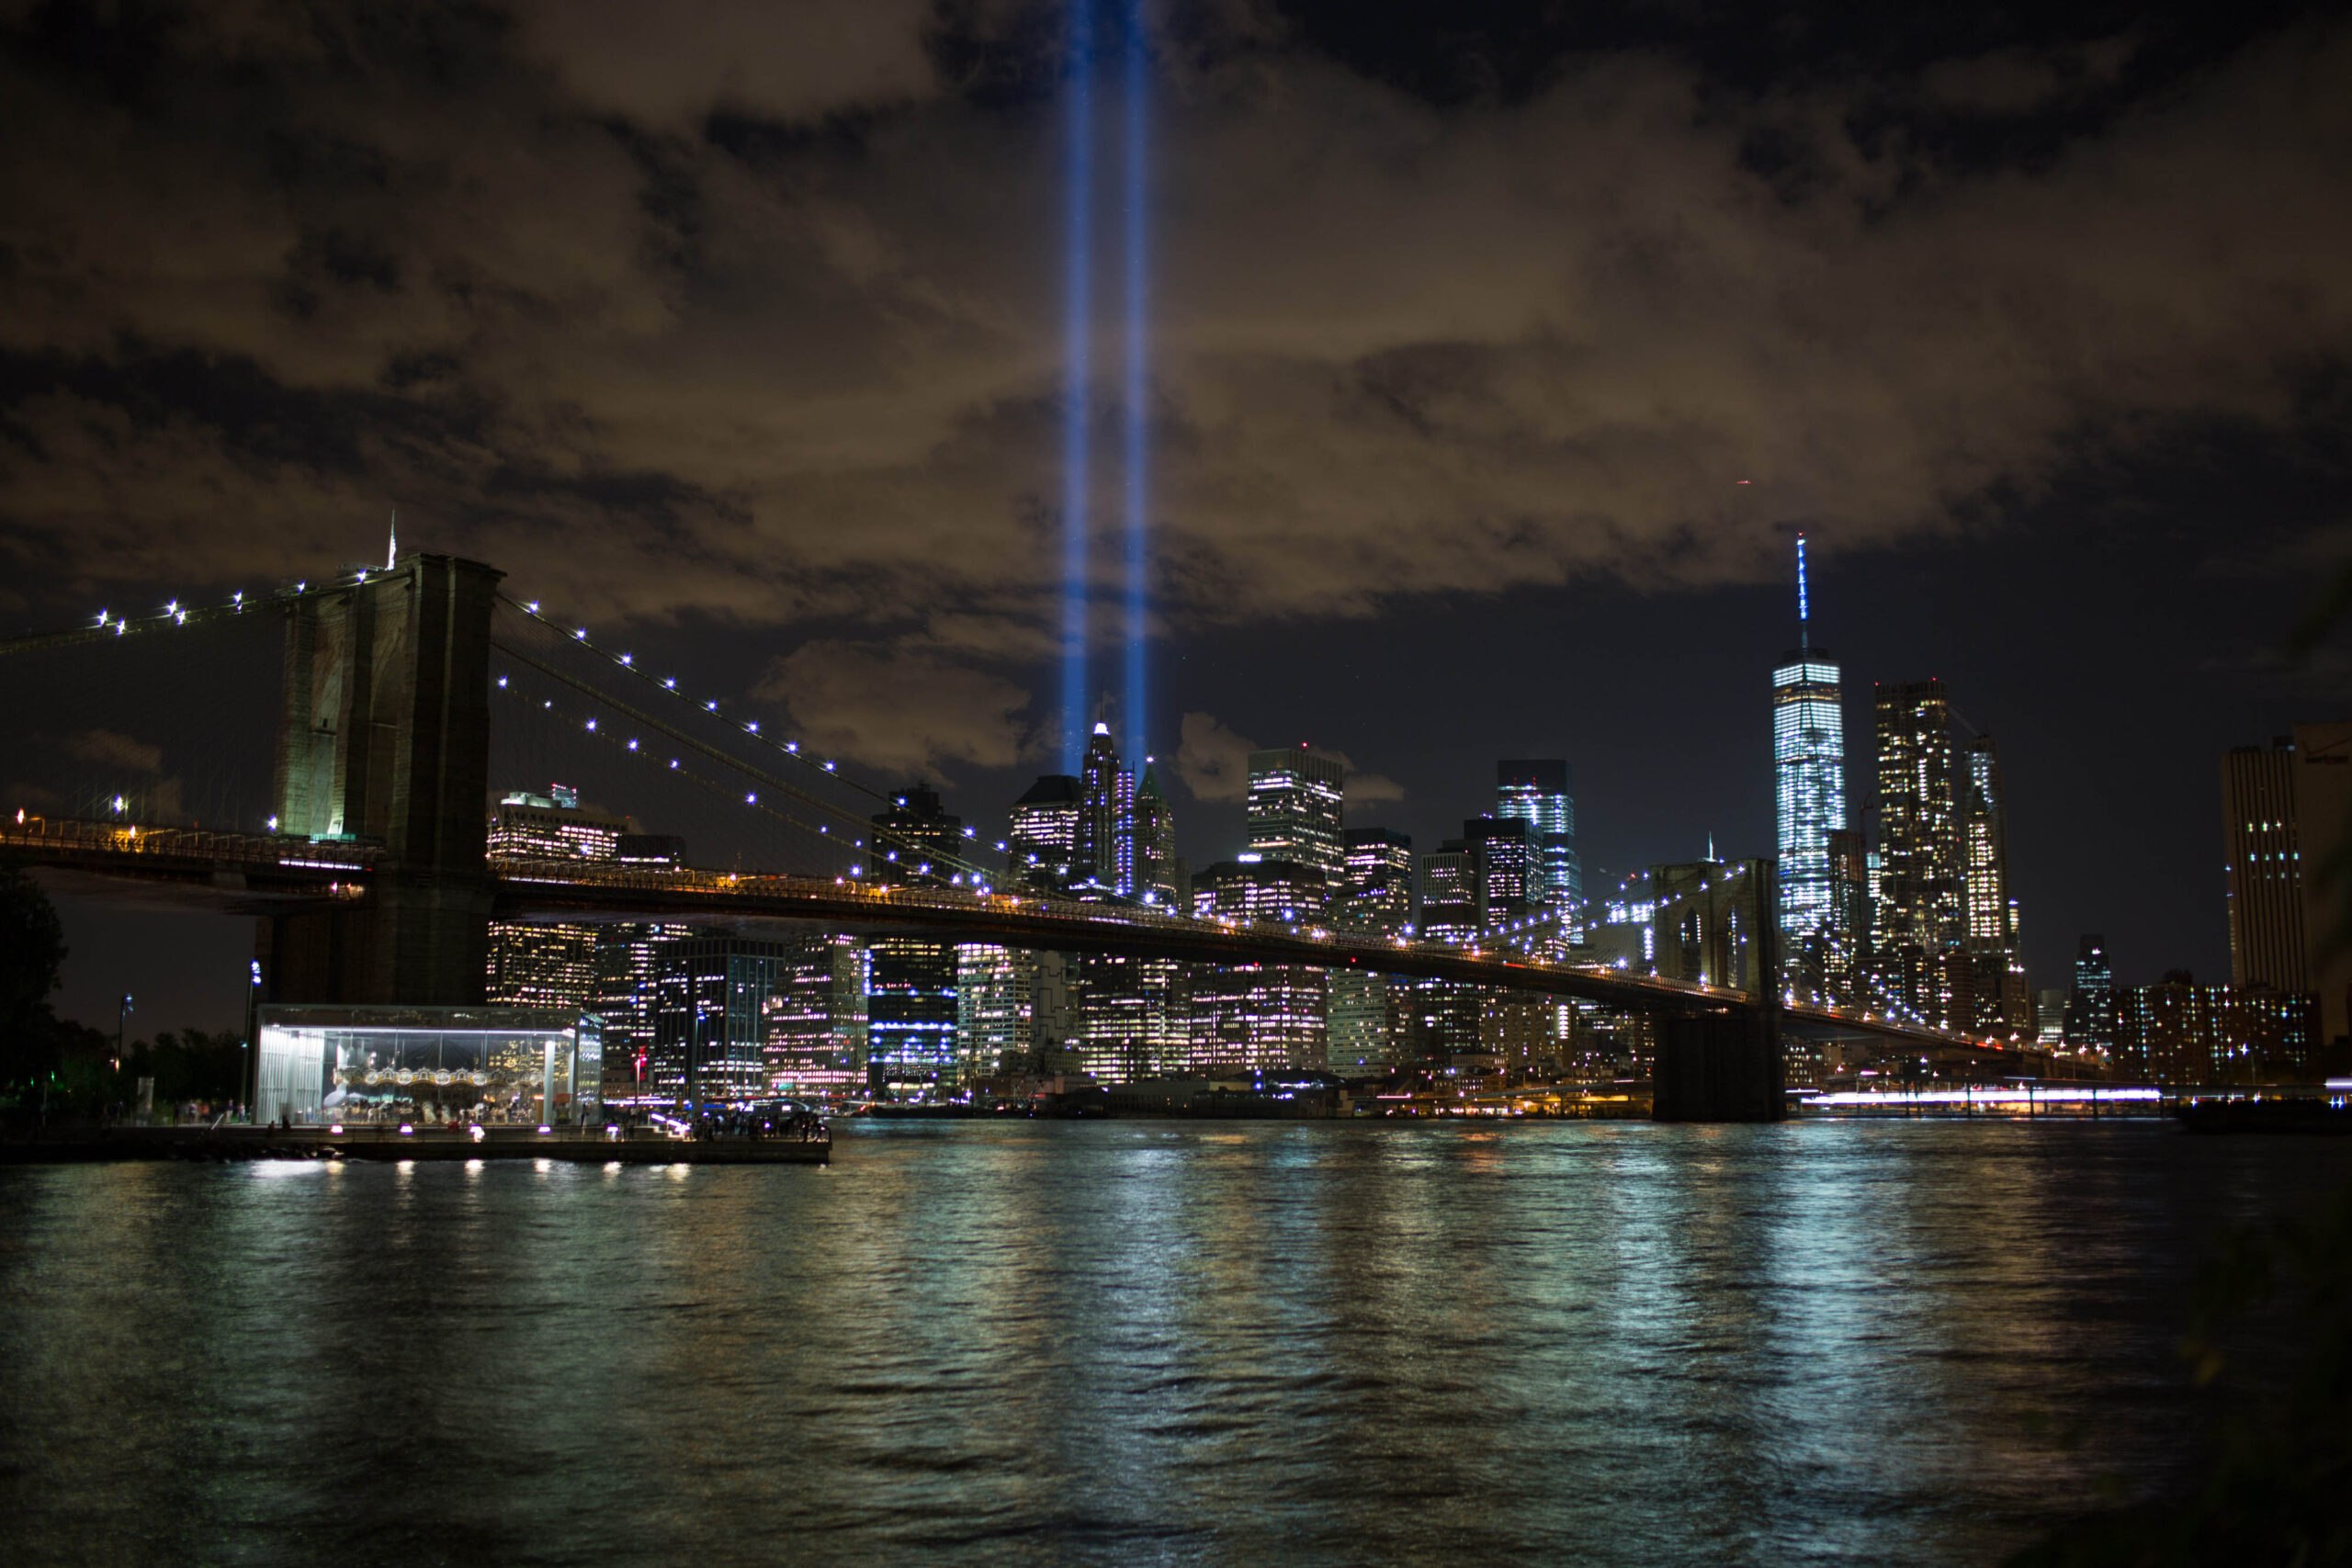 Sept. 11 ‘Tribute in Light’ canceled due to COVID-19 pandemic